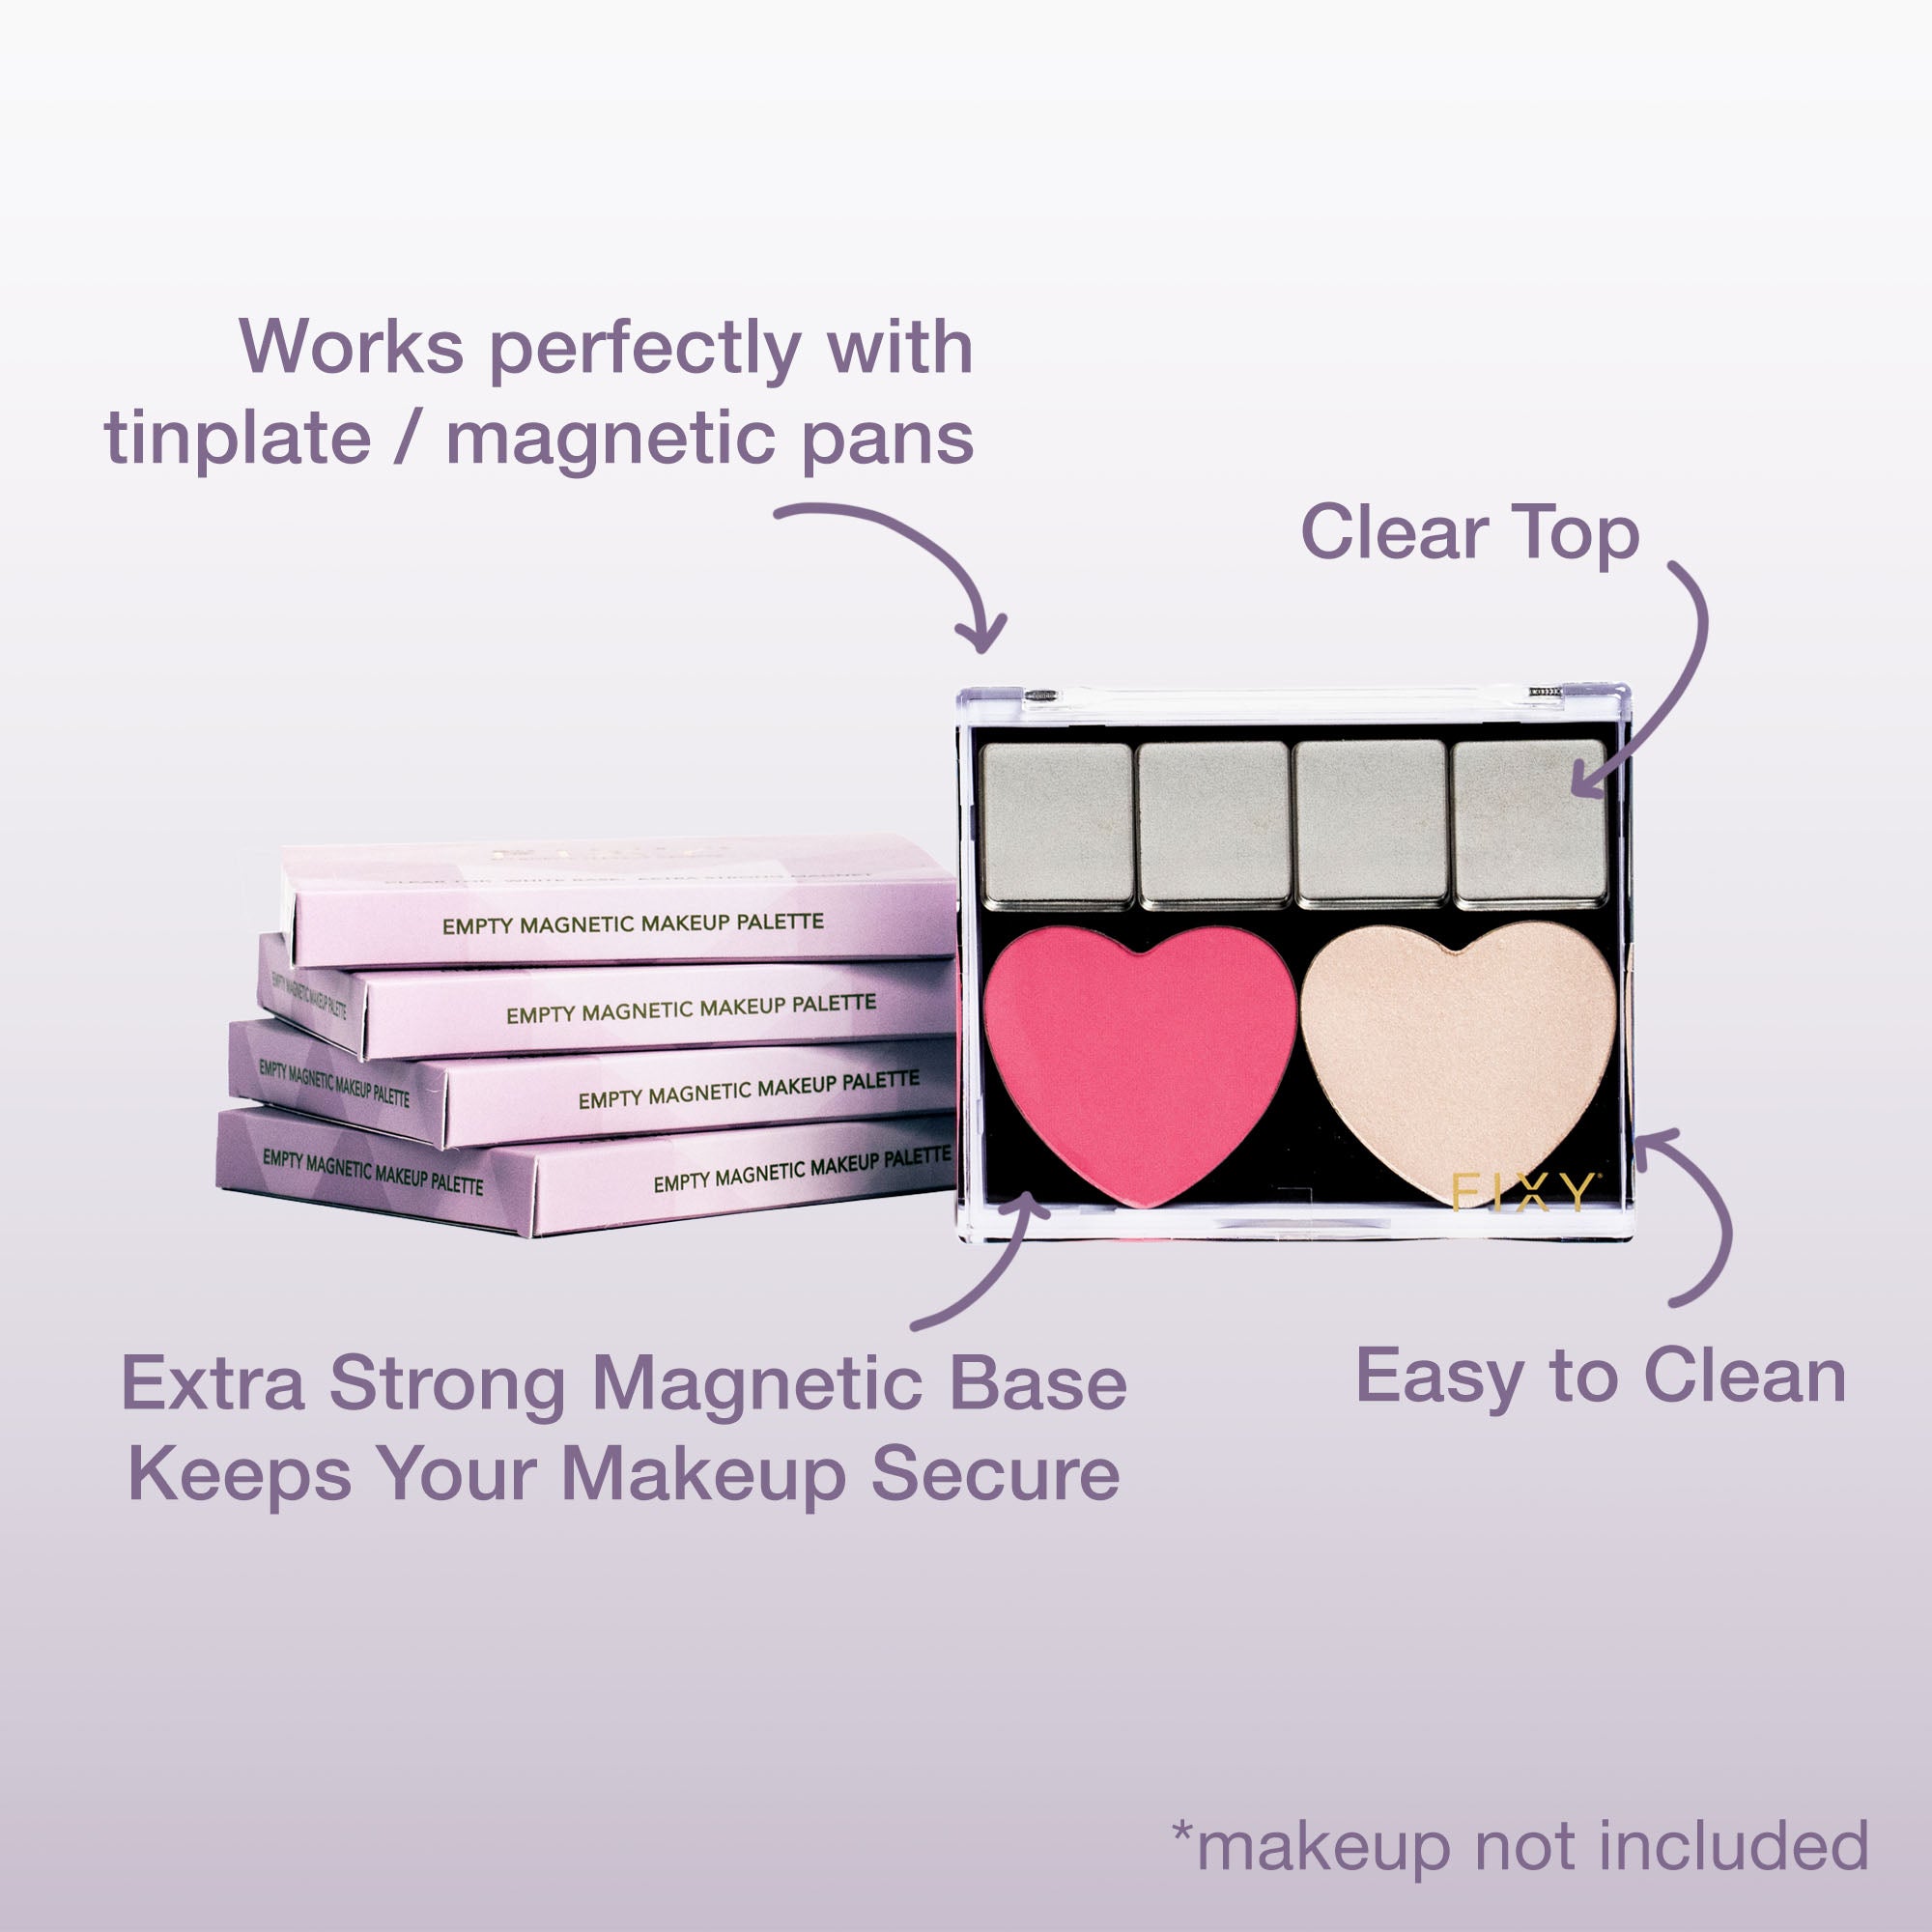 FIXY small empty magnetic palette clear light weightFIXY empty magnetic makeup palette with a clear top, filled with various shades of tinplate/magnetic pans, including a pink heart-shaped pan. Stacked palettes and descriptive callouts emphasize the palette's extra-strong magnetic base and easy-to-clean surface. Size Small